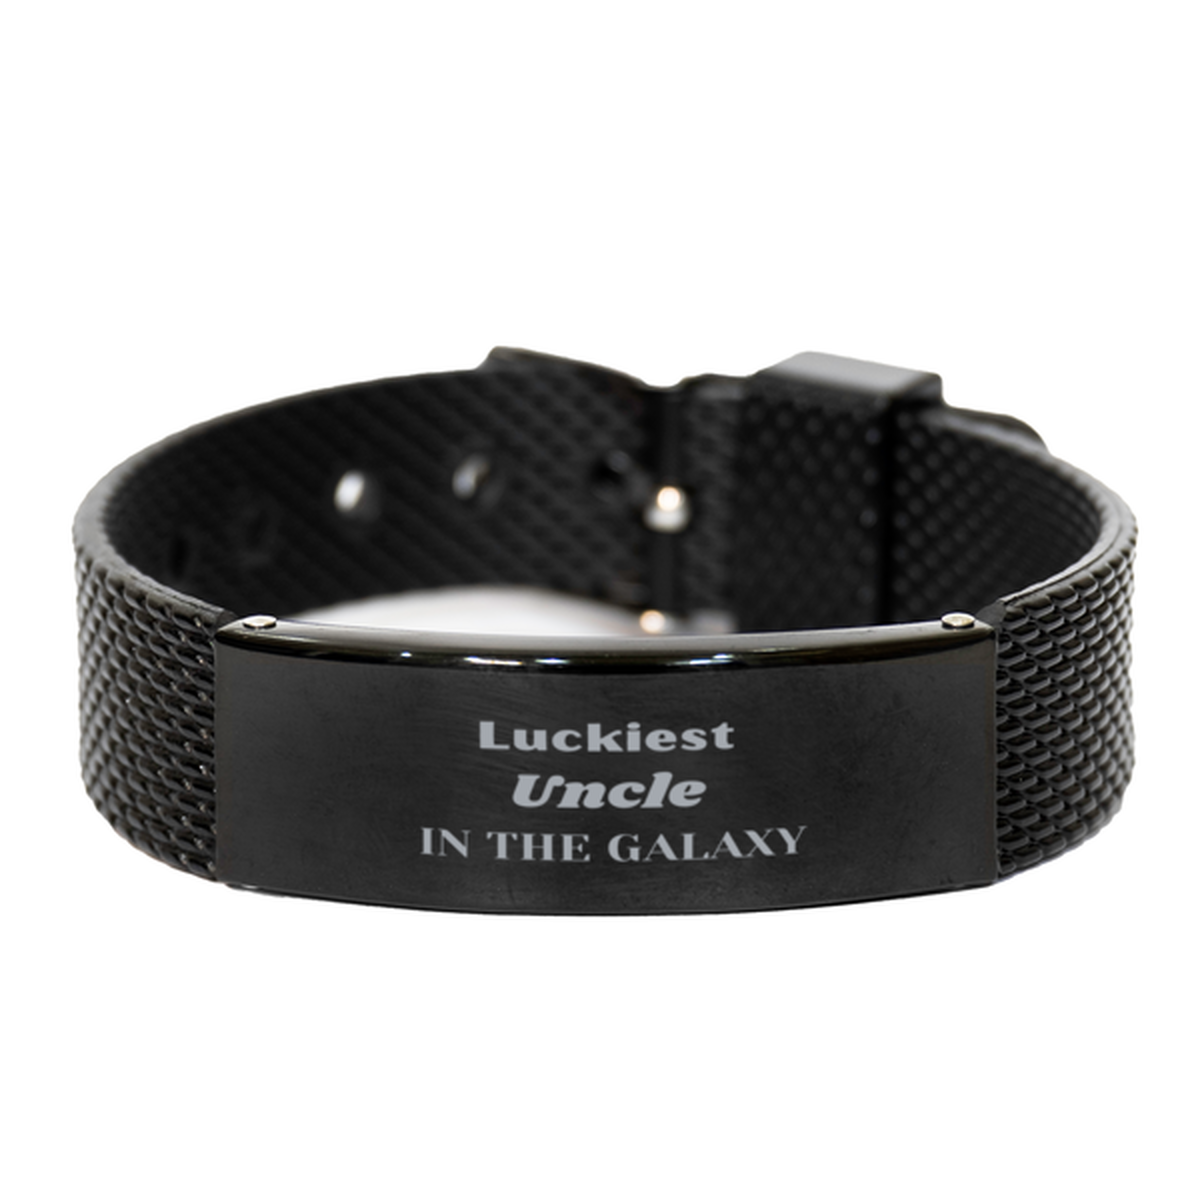 Luckiest Uncle in the Galaxy, To My Uncle Engraved Gifts, Christmas Uncle Black Shark Mesh Bracelet Gifts, X-mas Birthday Unique Gifts For Uncle Men Women